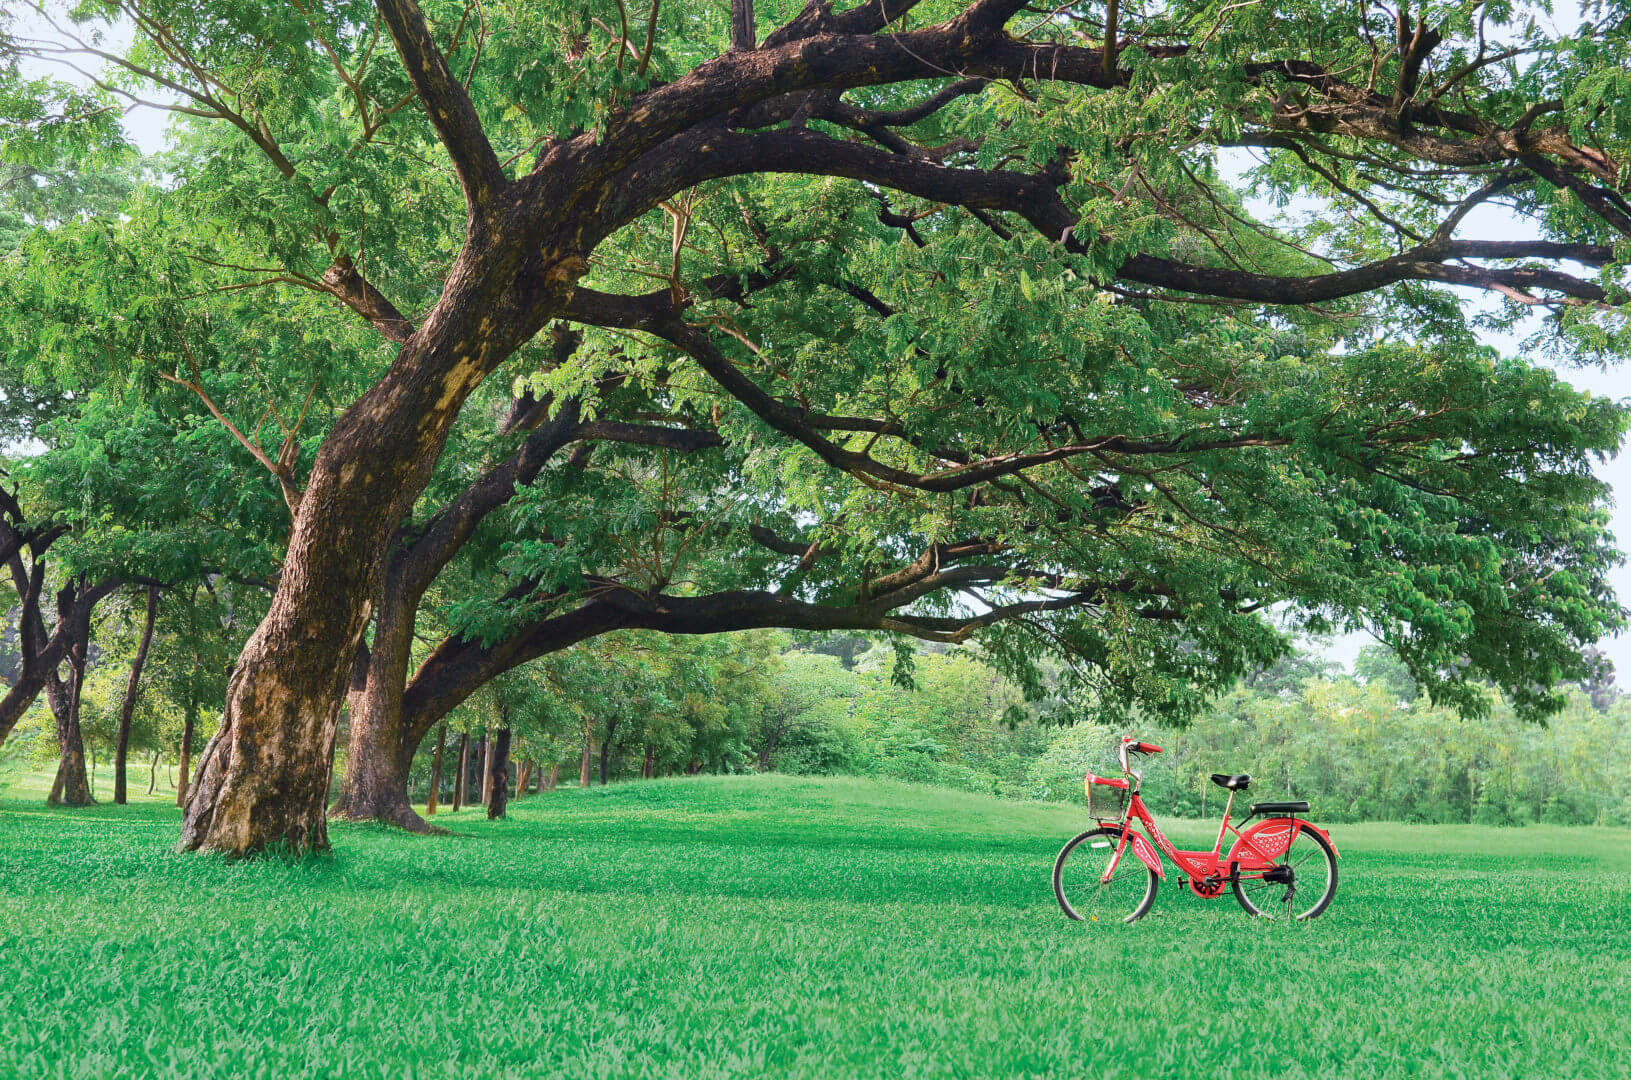 Red bike on green grass under over hanging trees.